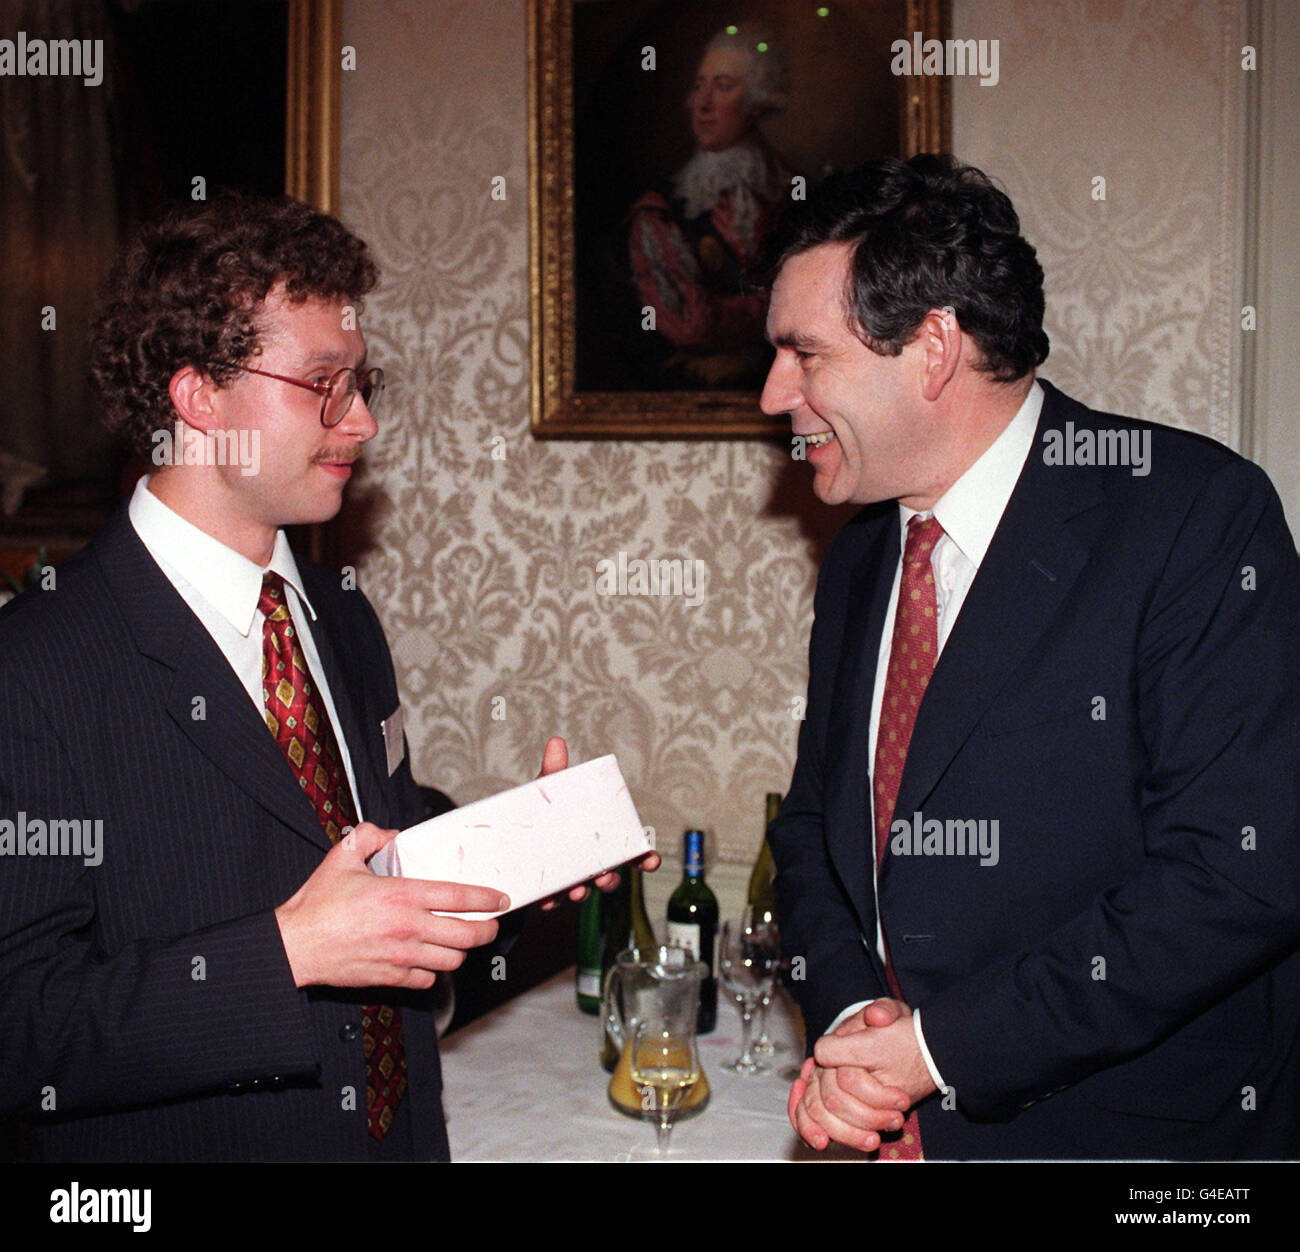 British Chancellor Gordon Brown (right) presents Alexander Antipov, aged 25 from Moscow, the 1000th participant of the Chancellor's Financial Sector Scheme with a gift at No.11 Downing Street this evening (Monday). The Scheme, which since 1992 has offered work placements to young high-flyers from Russia and the other 14 successor states to the Soviet Union. Mr Antipov has been placed with Scudders Investment UK to research international bond markets. Photo by Sean Dempsey/PA. (PA Pool lphoto) Stock Photo